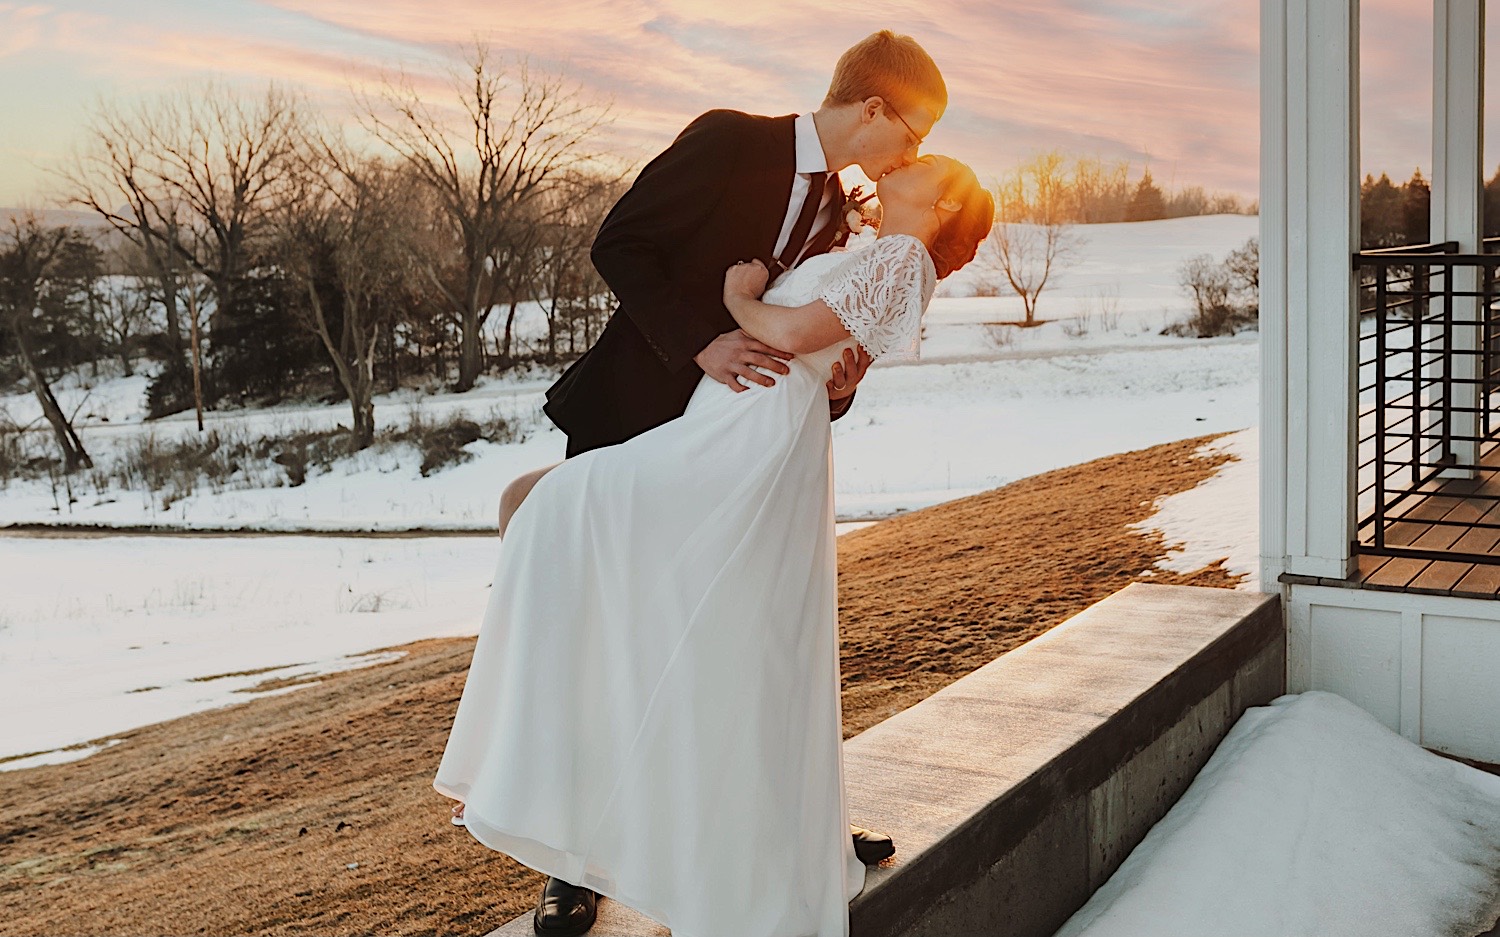 A bride and groom kiss under the sunset while on the back patio of their wedding venue, Woodhaven Weddings + Events